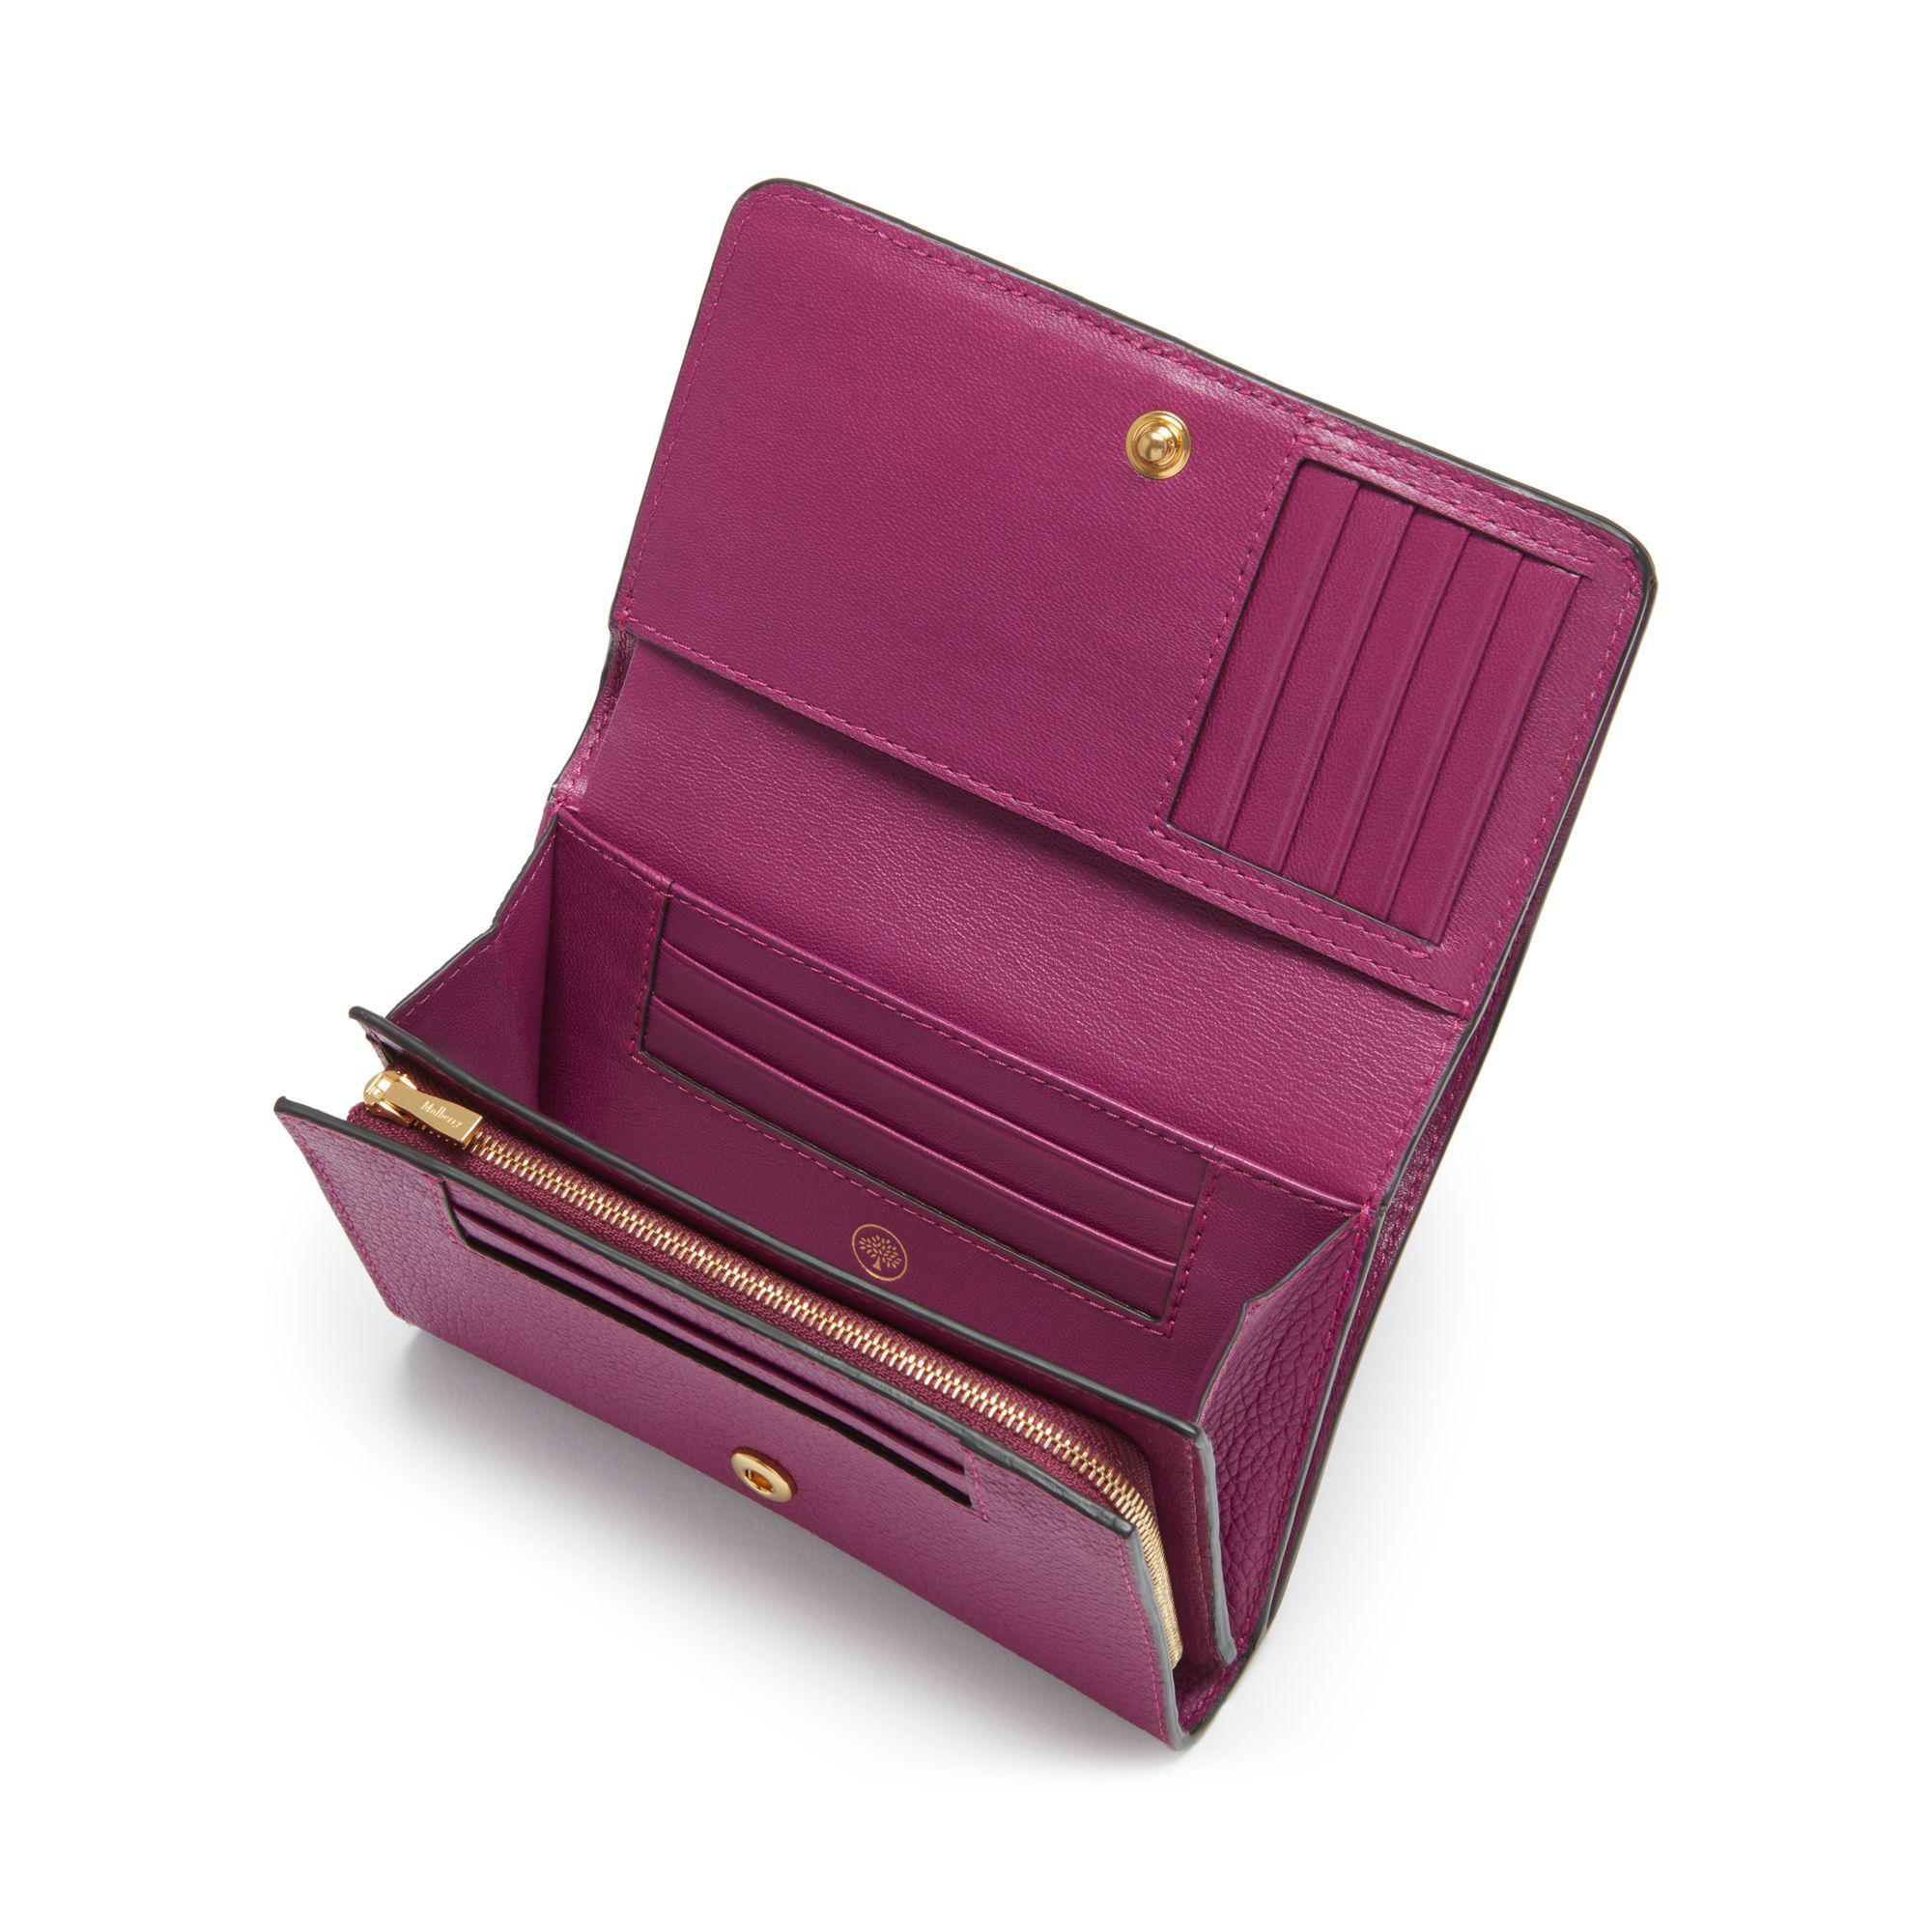 Mulberry Leather Medium Continental French Purse in Violet (Purple) - Lyst